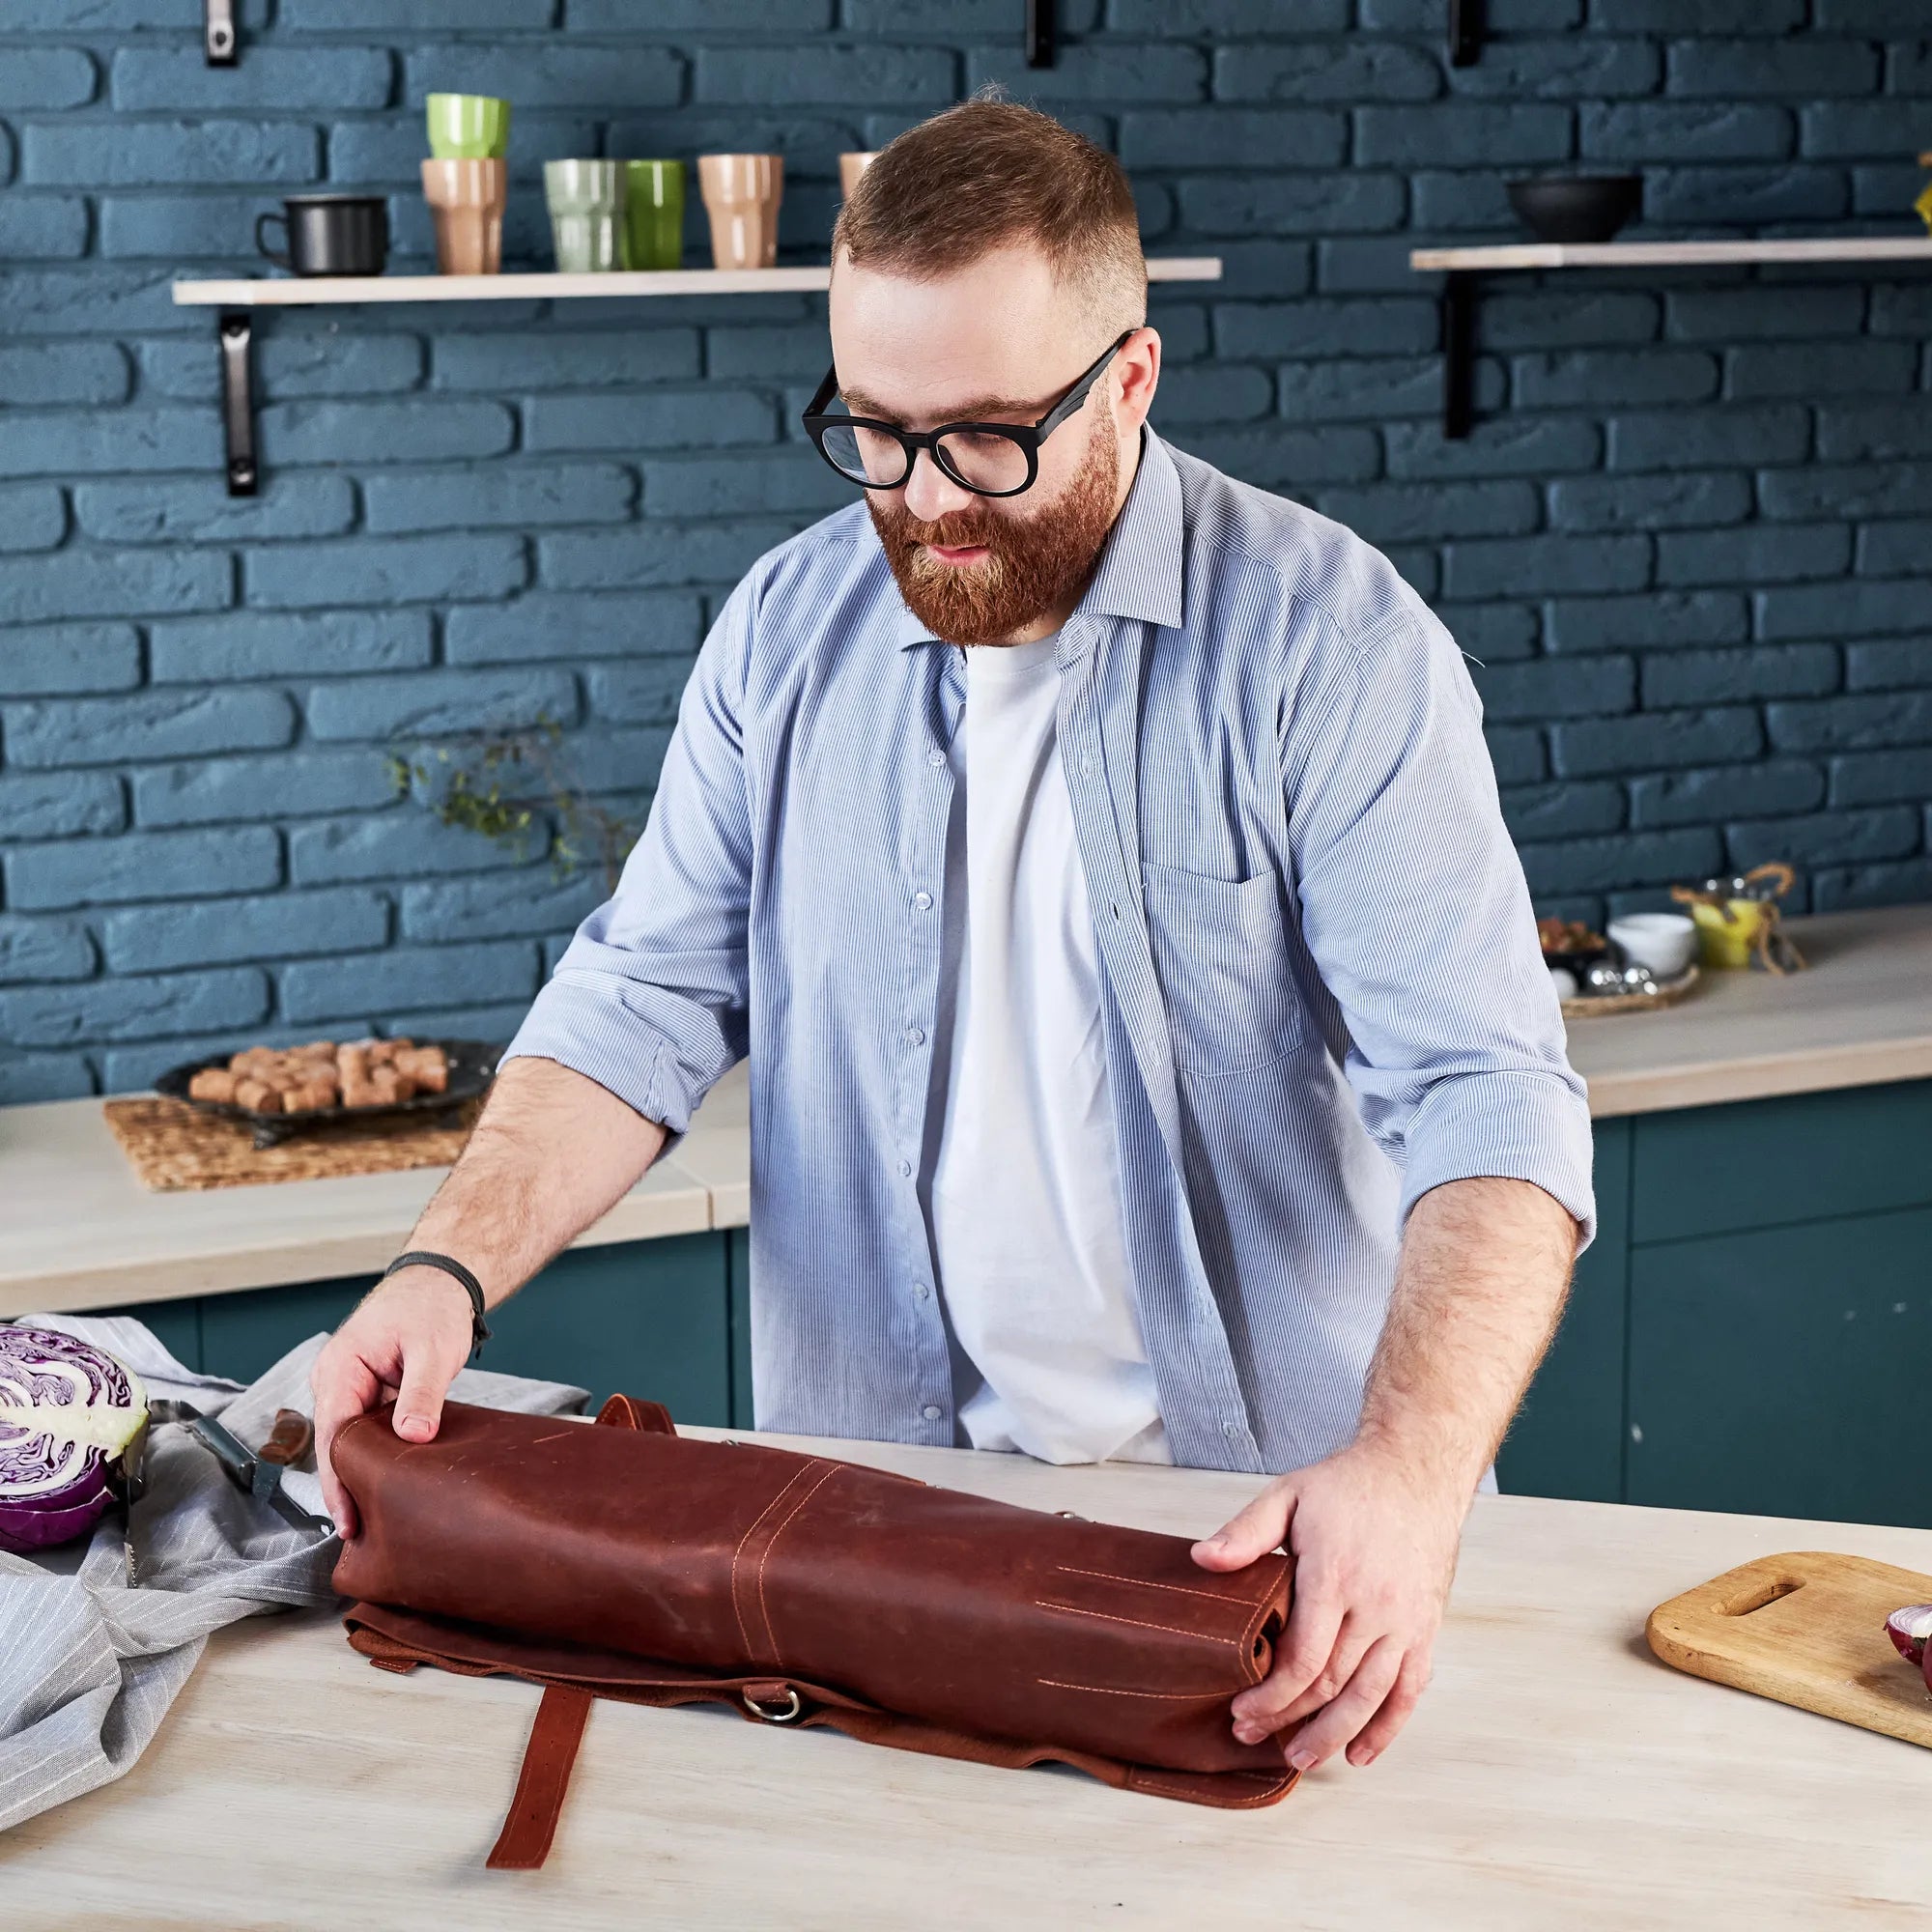 Leather BBQ Knife Roll Bag (6 slots)